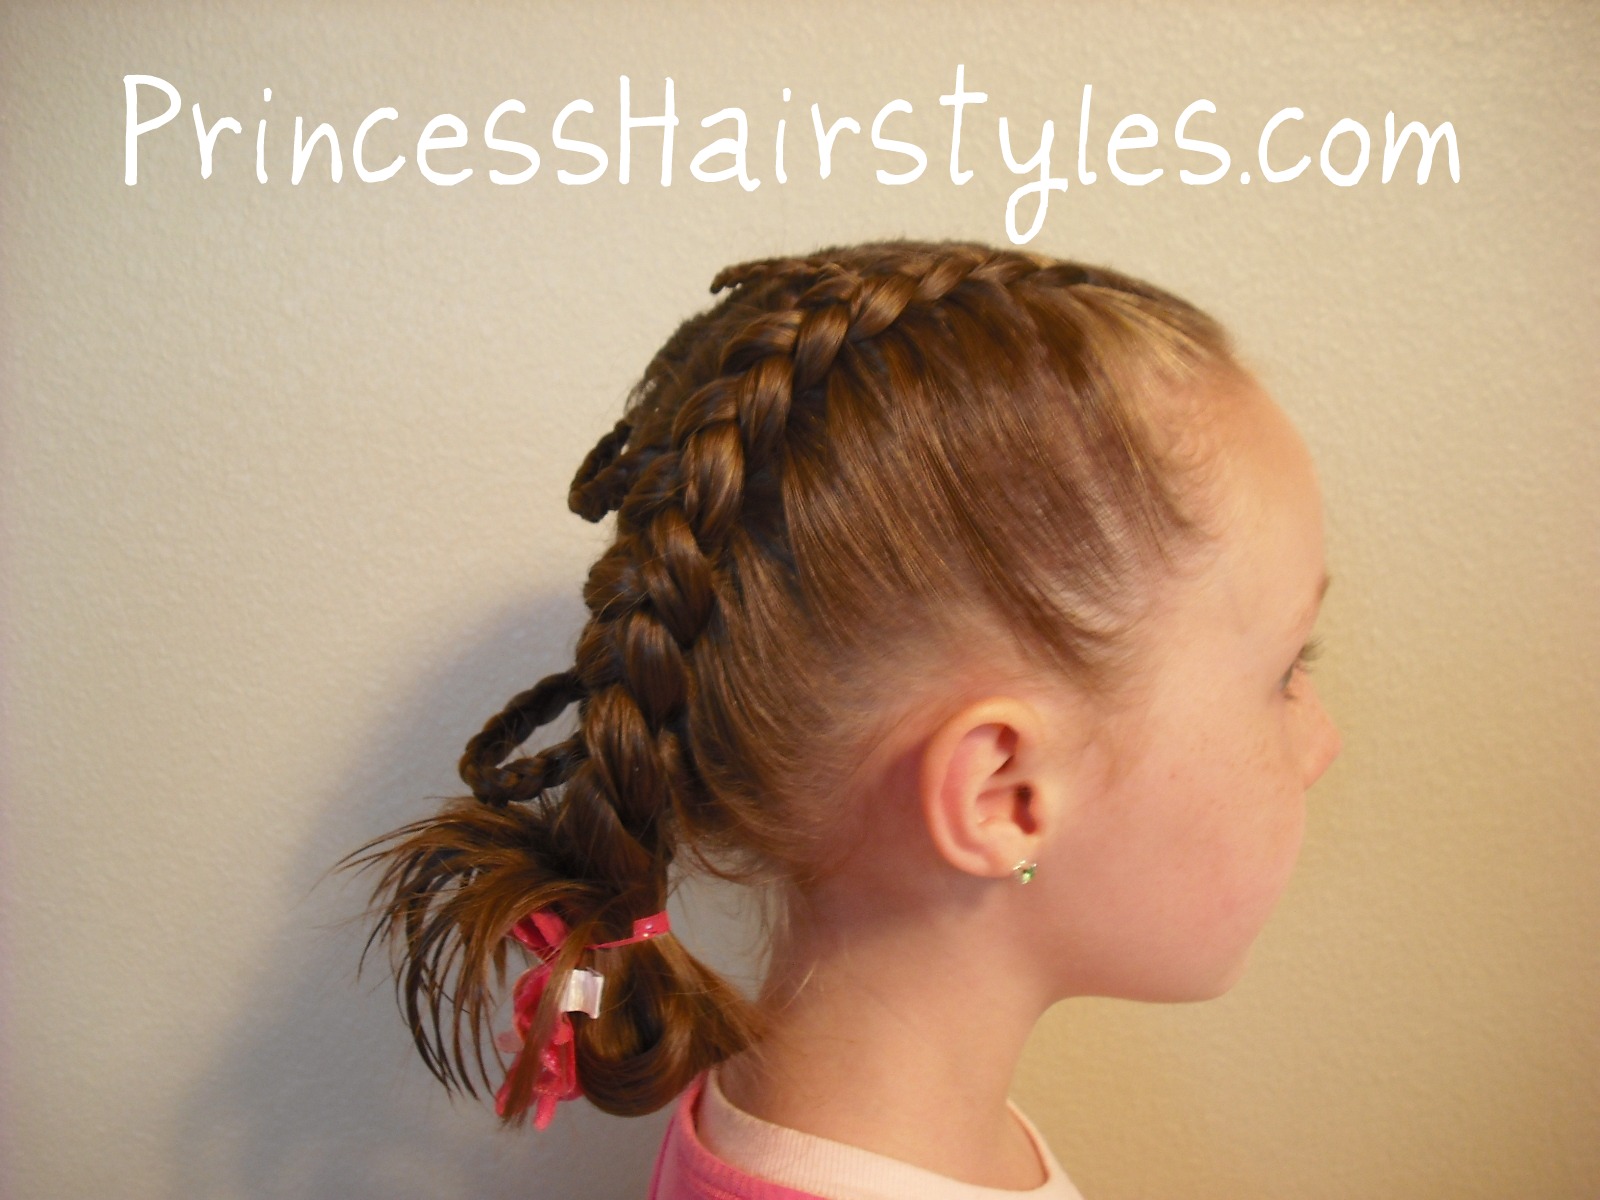 Fancy Princess Braids | Hairstyles For Girls - Princess Hairstyles